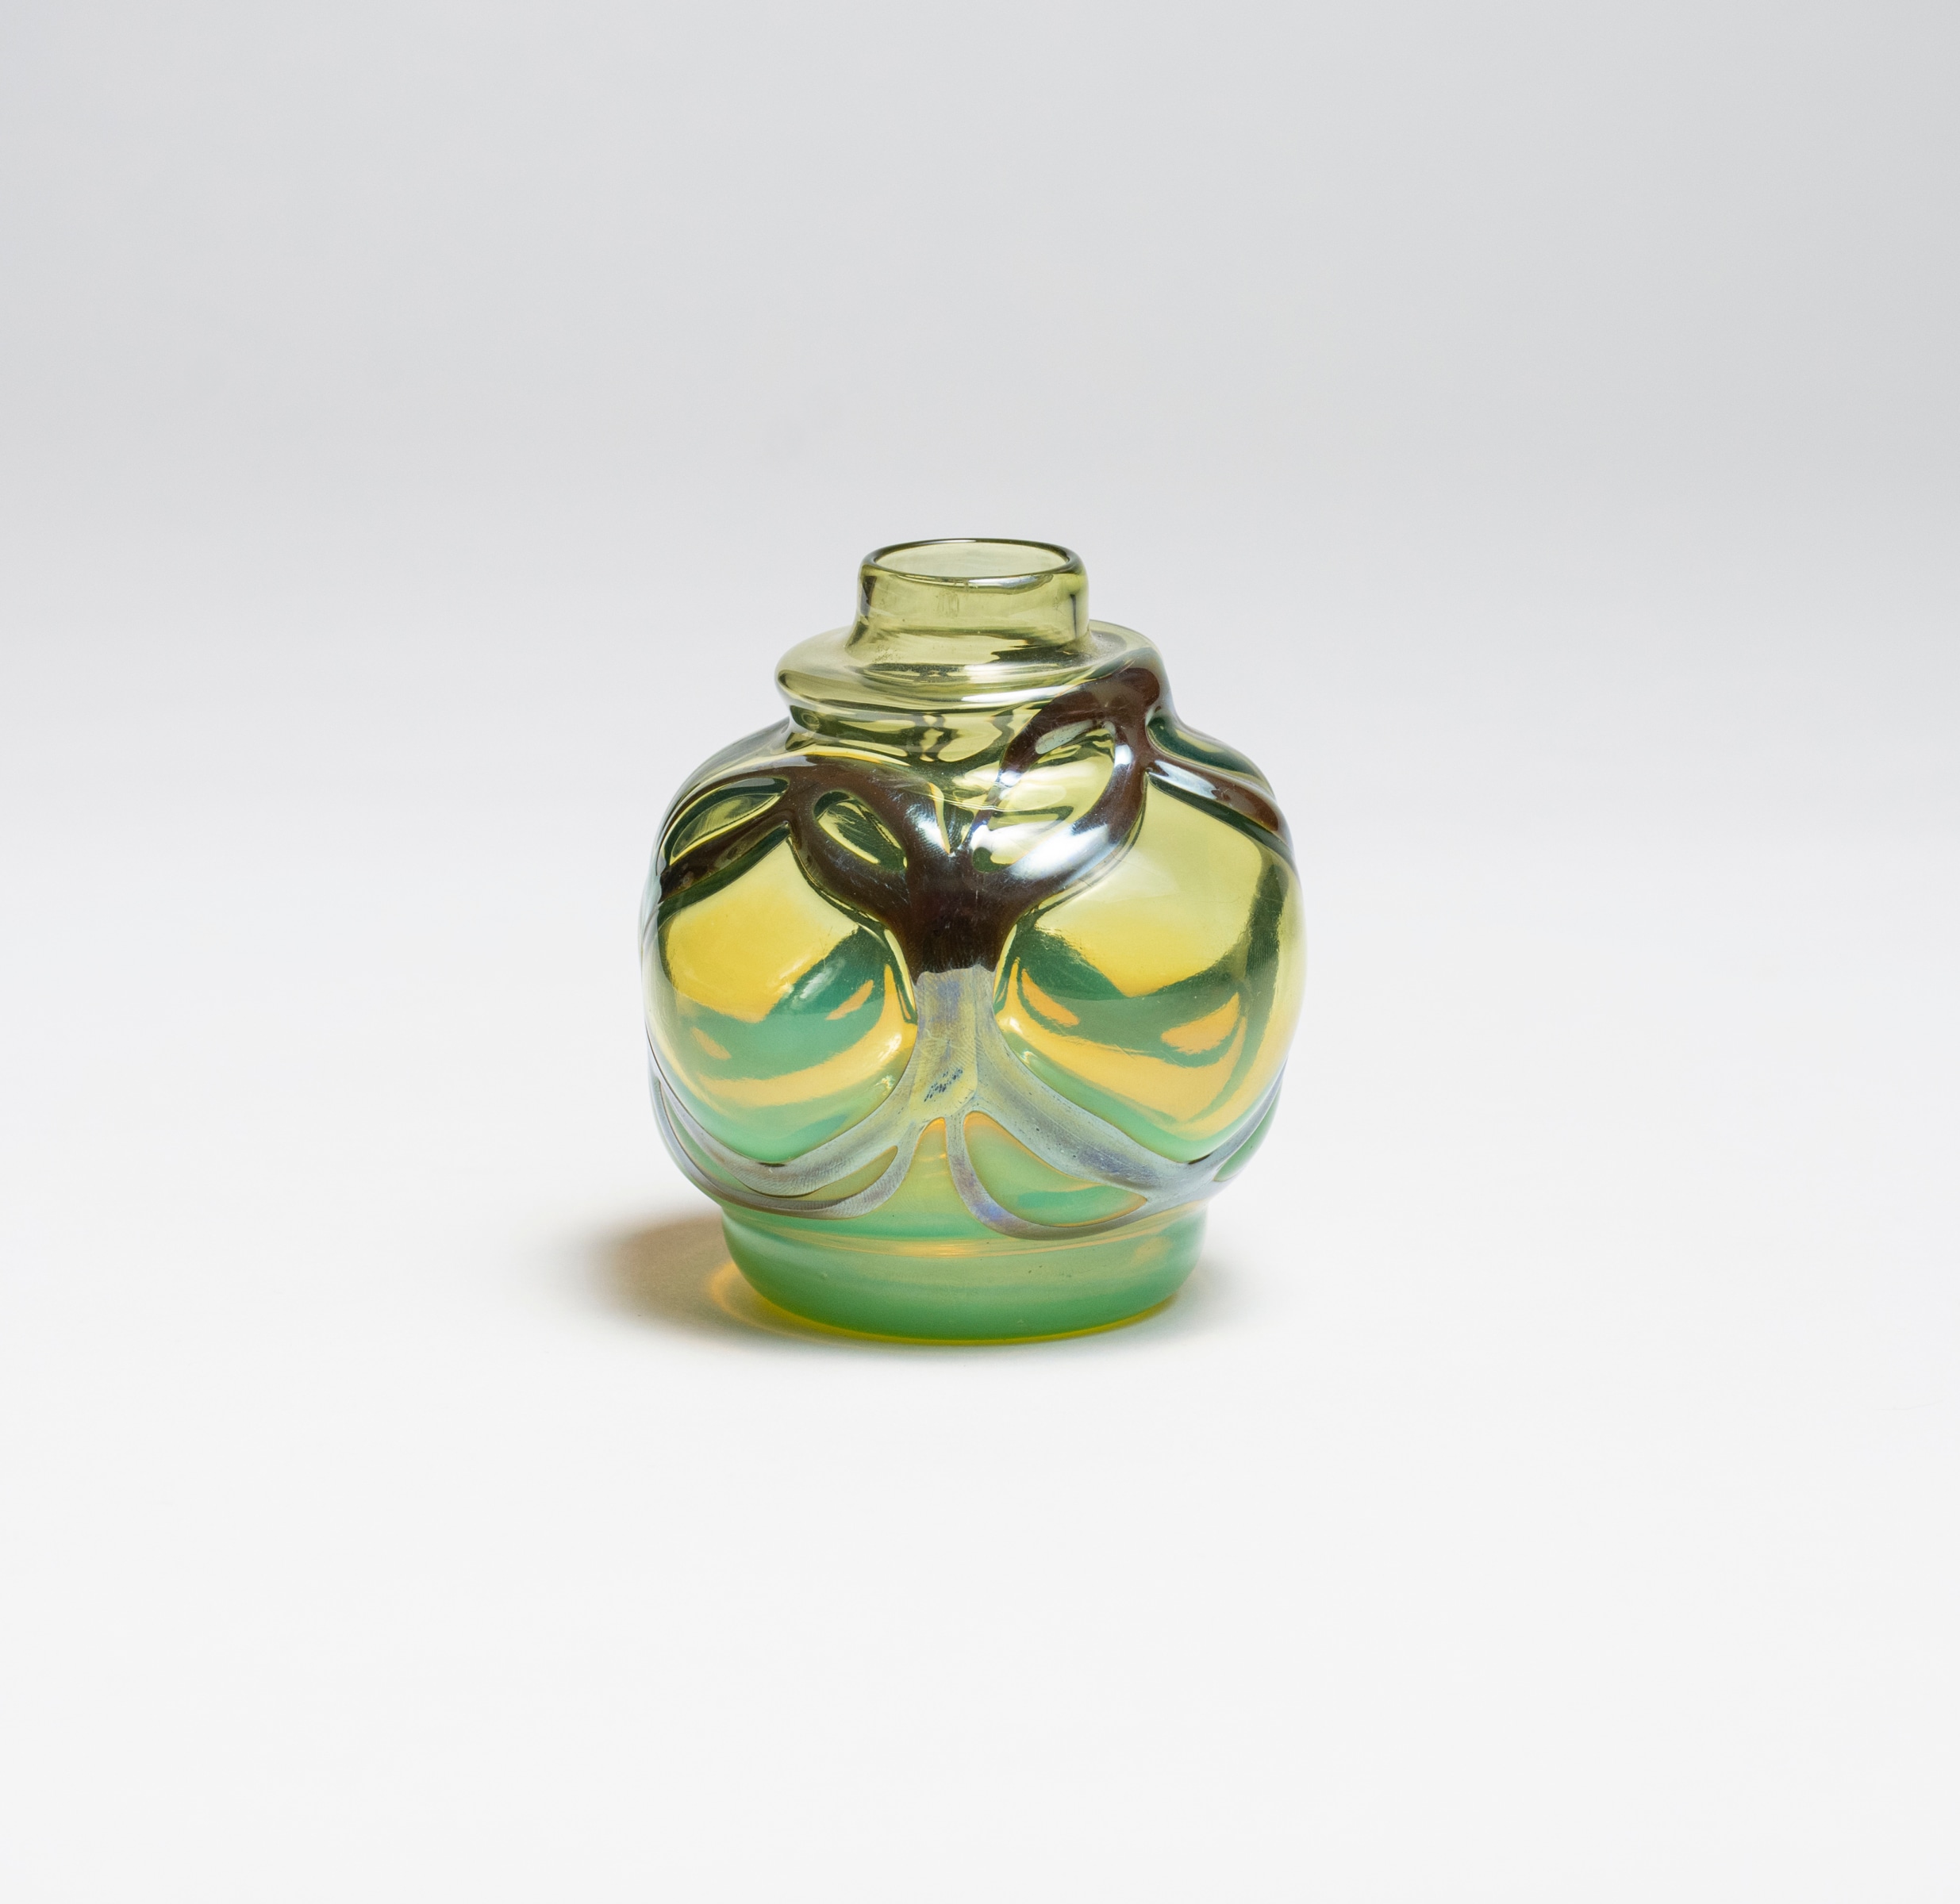 an early piece of blown tiffany favrile glass, a smallish cabinet vase in a slightly neon yellow-ish green tone, with a different layer of silvery glass applied to the surface as if metalwork.